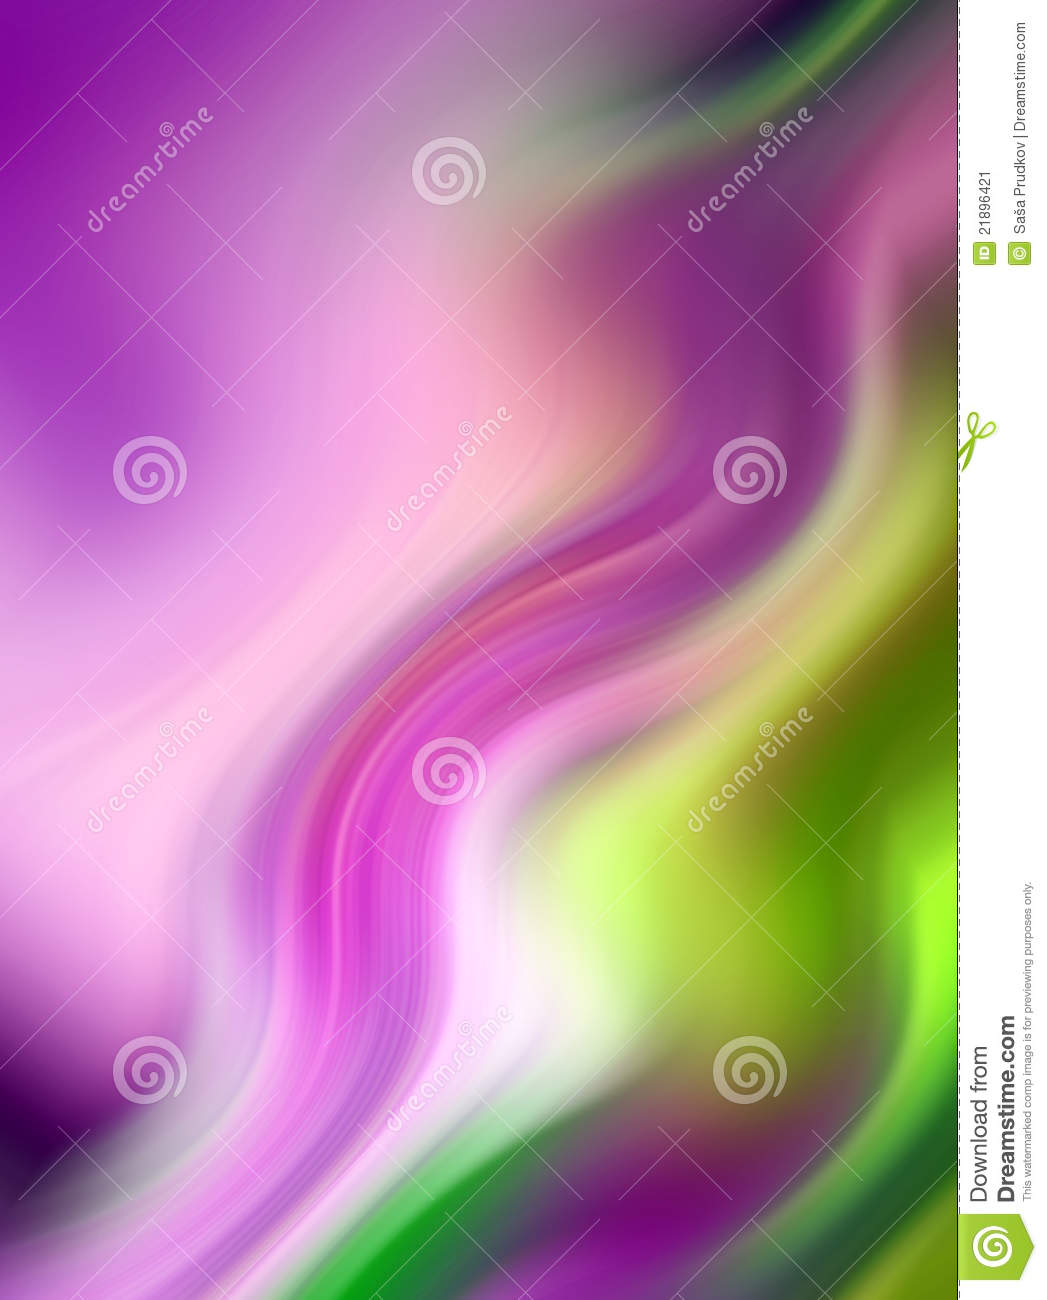 Purple Green Abstract Backgrounds Wallpaper Full HD